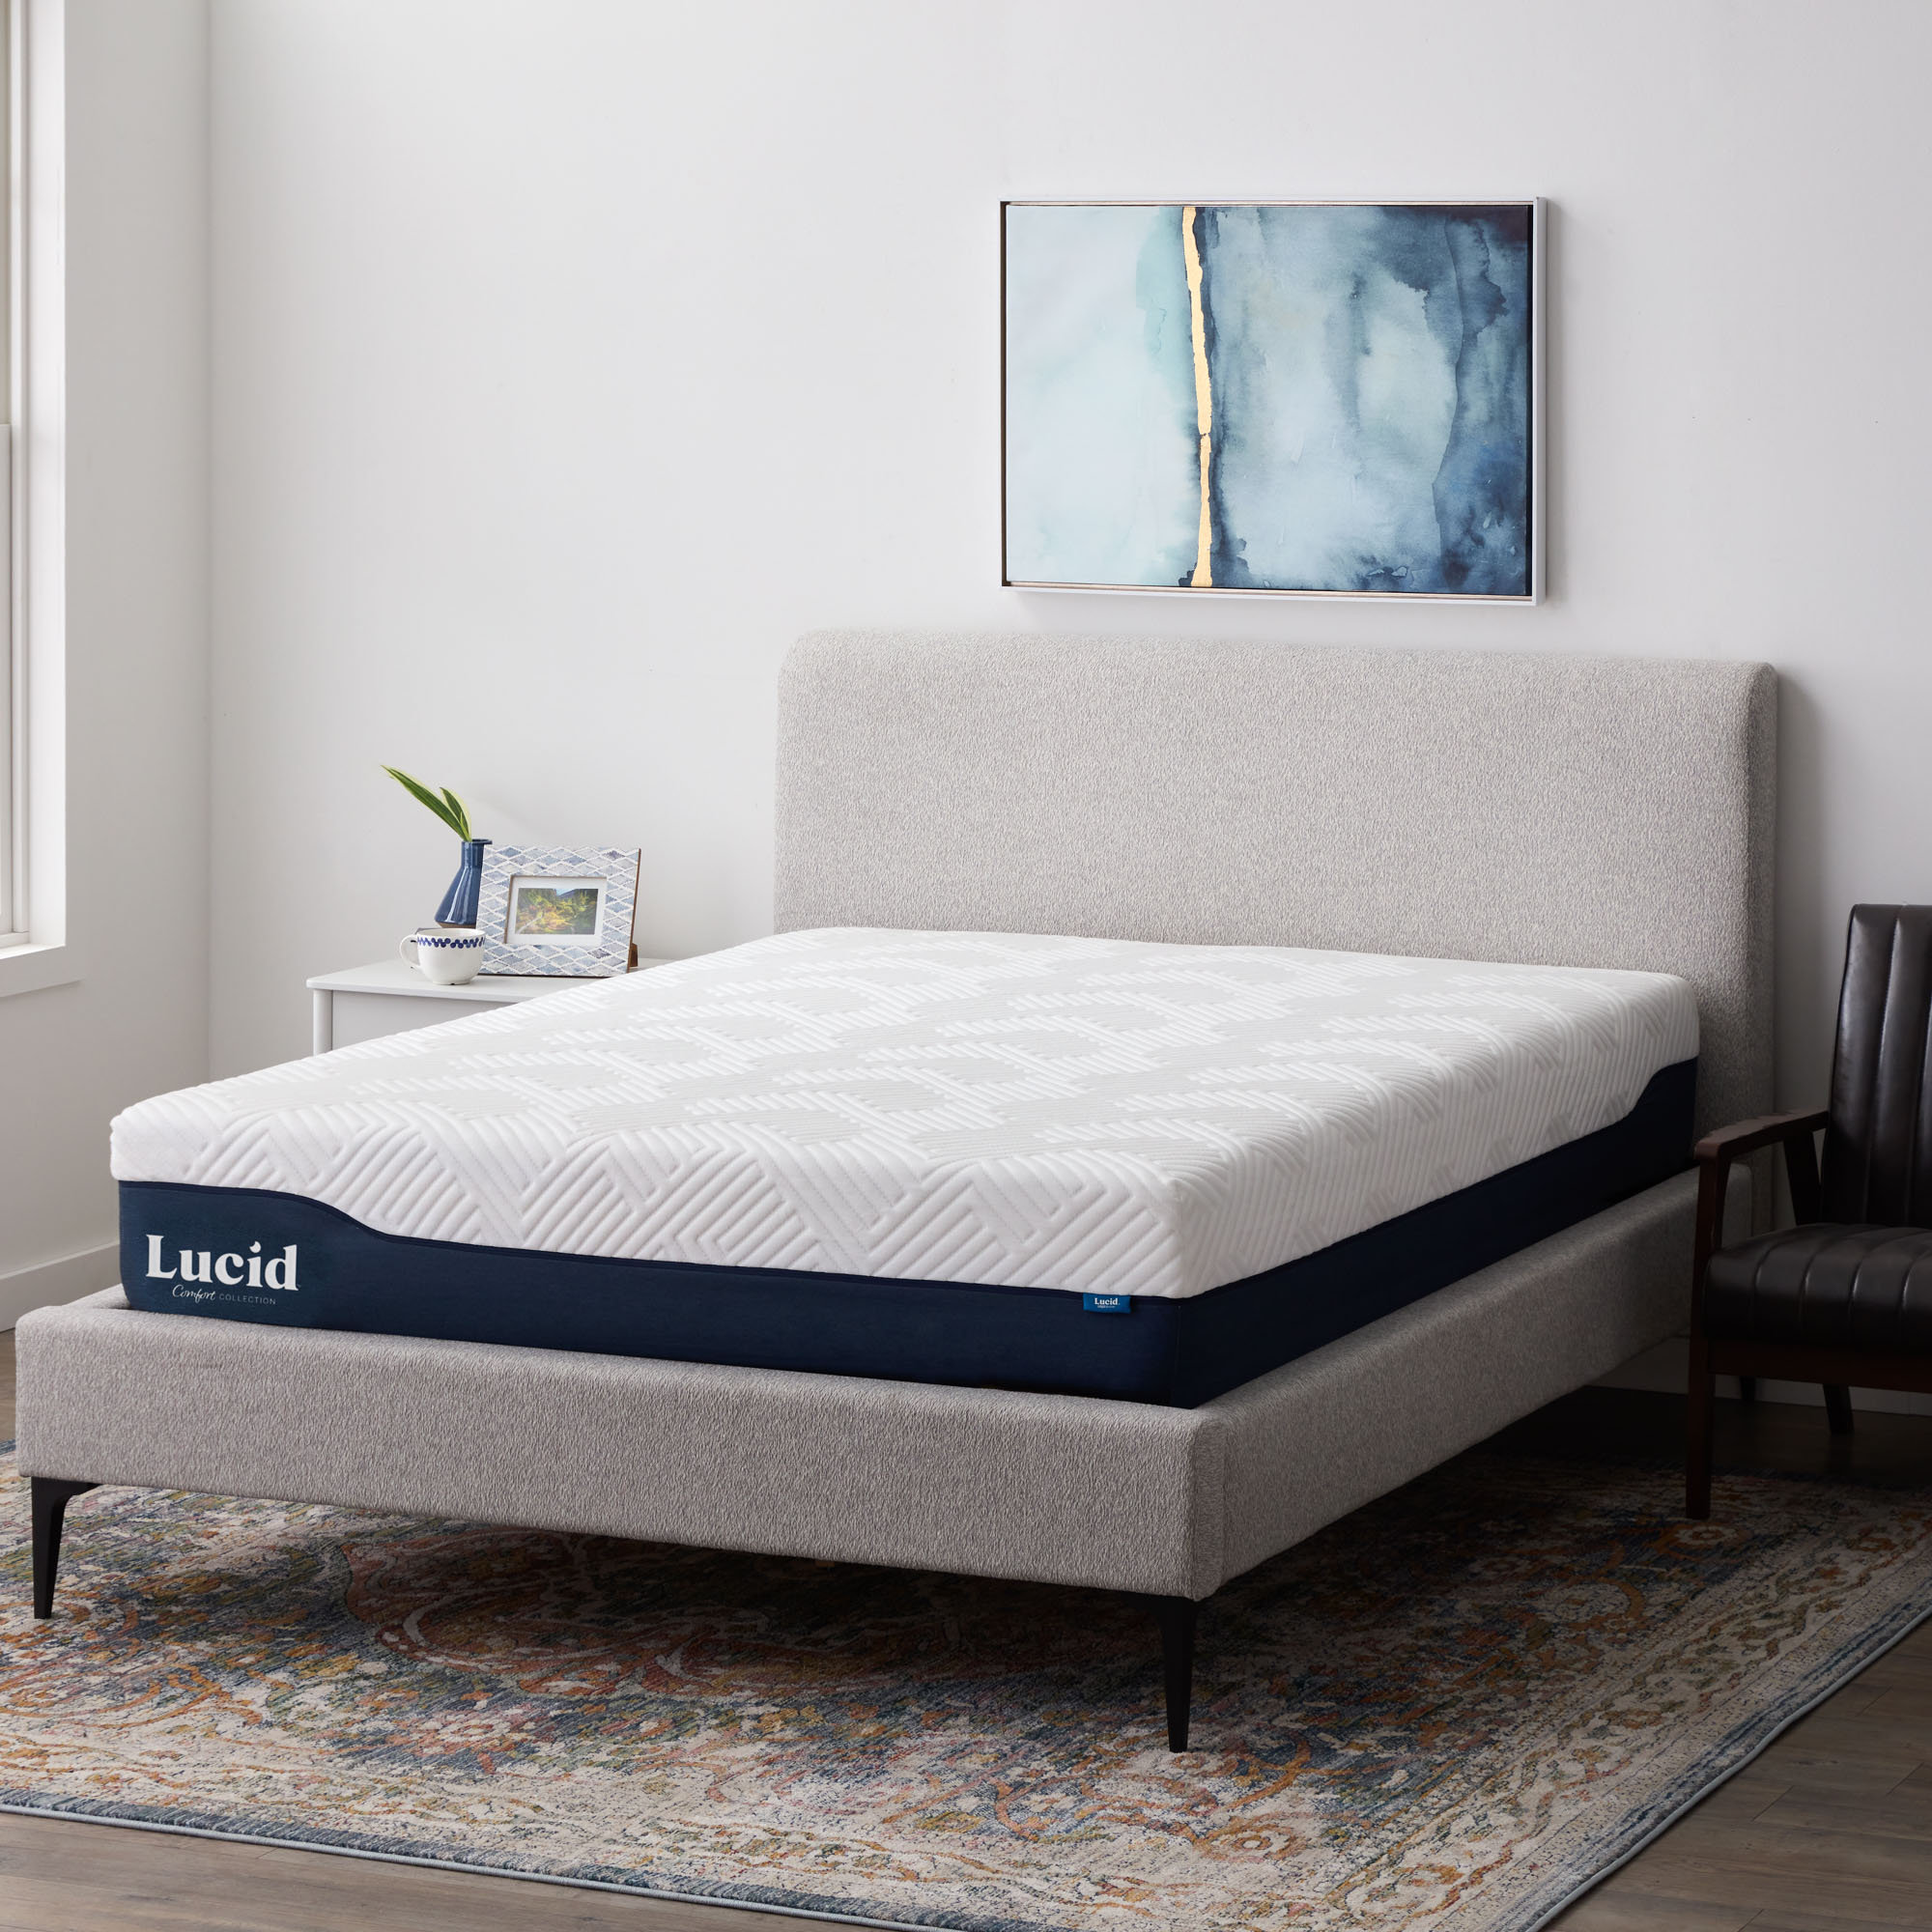 Lucid Comfort Collection And Aloe Infused Memory Foam Topper |  ccelrecreo.com